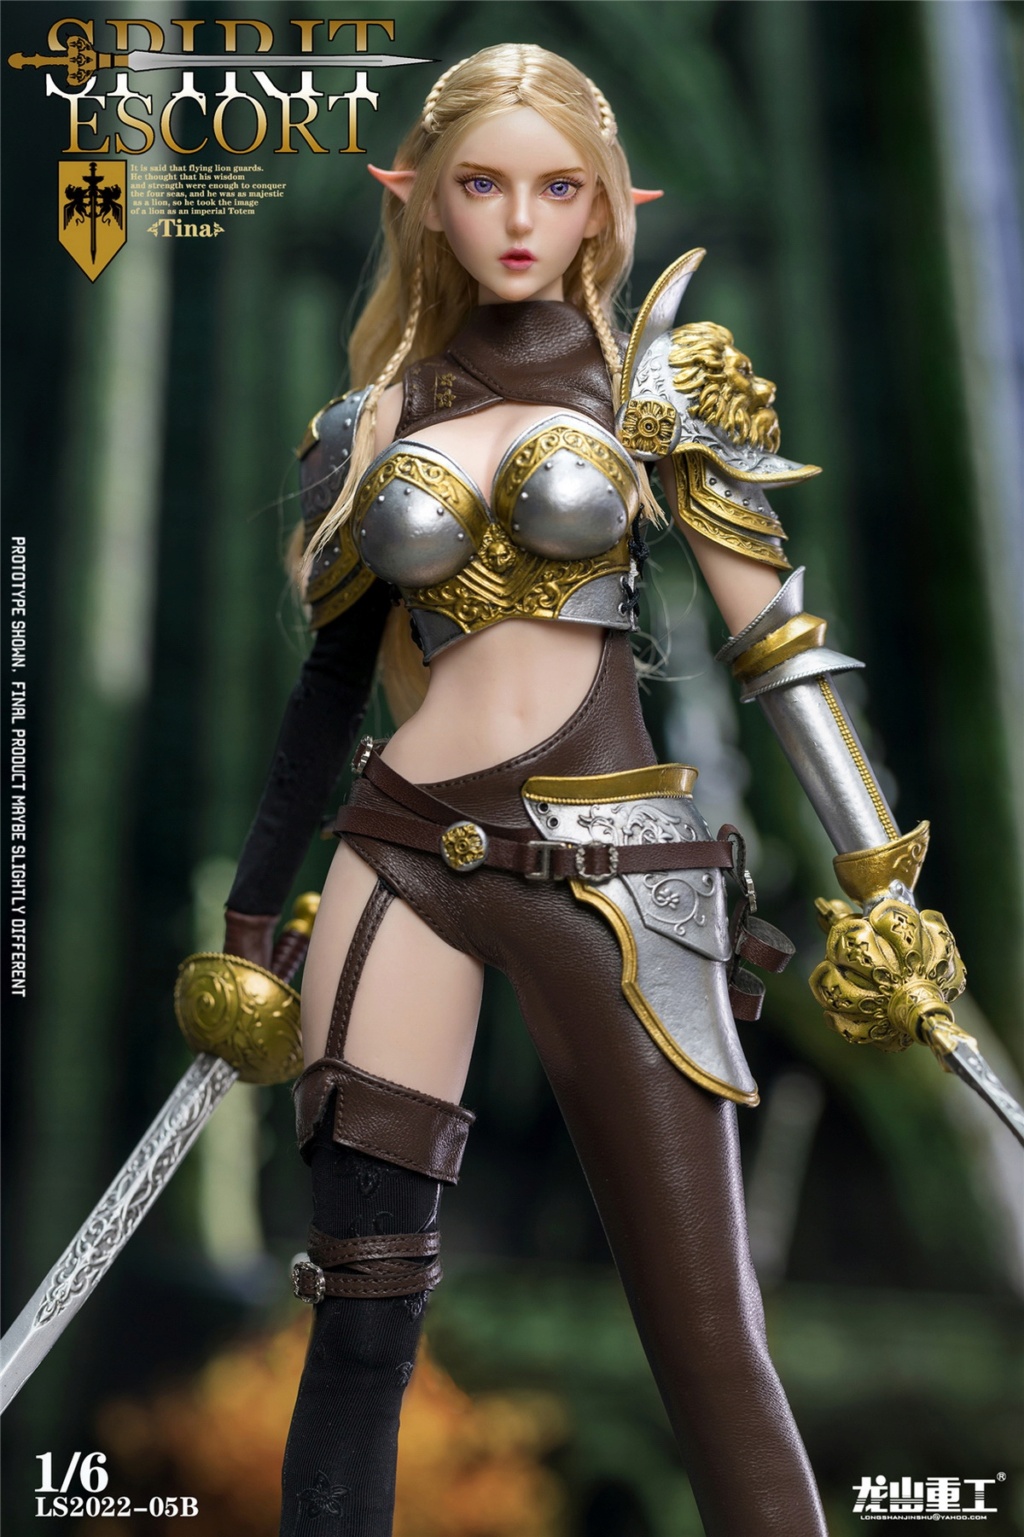 Anna - NEW PRODUCT: Longshan Heavy Industry: 1/6 Elf Guard Series First Shot - Anna & Tina Action Figure #SL2022-05 17400514